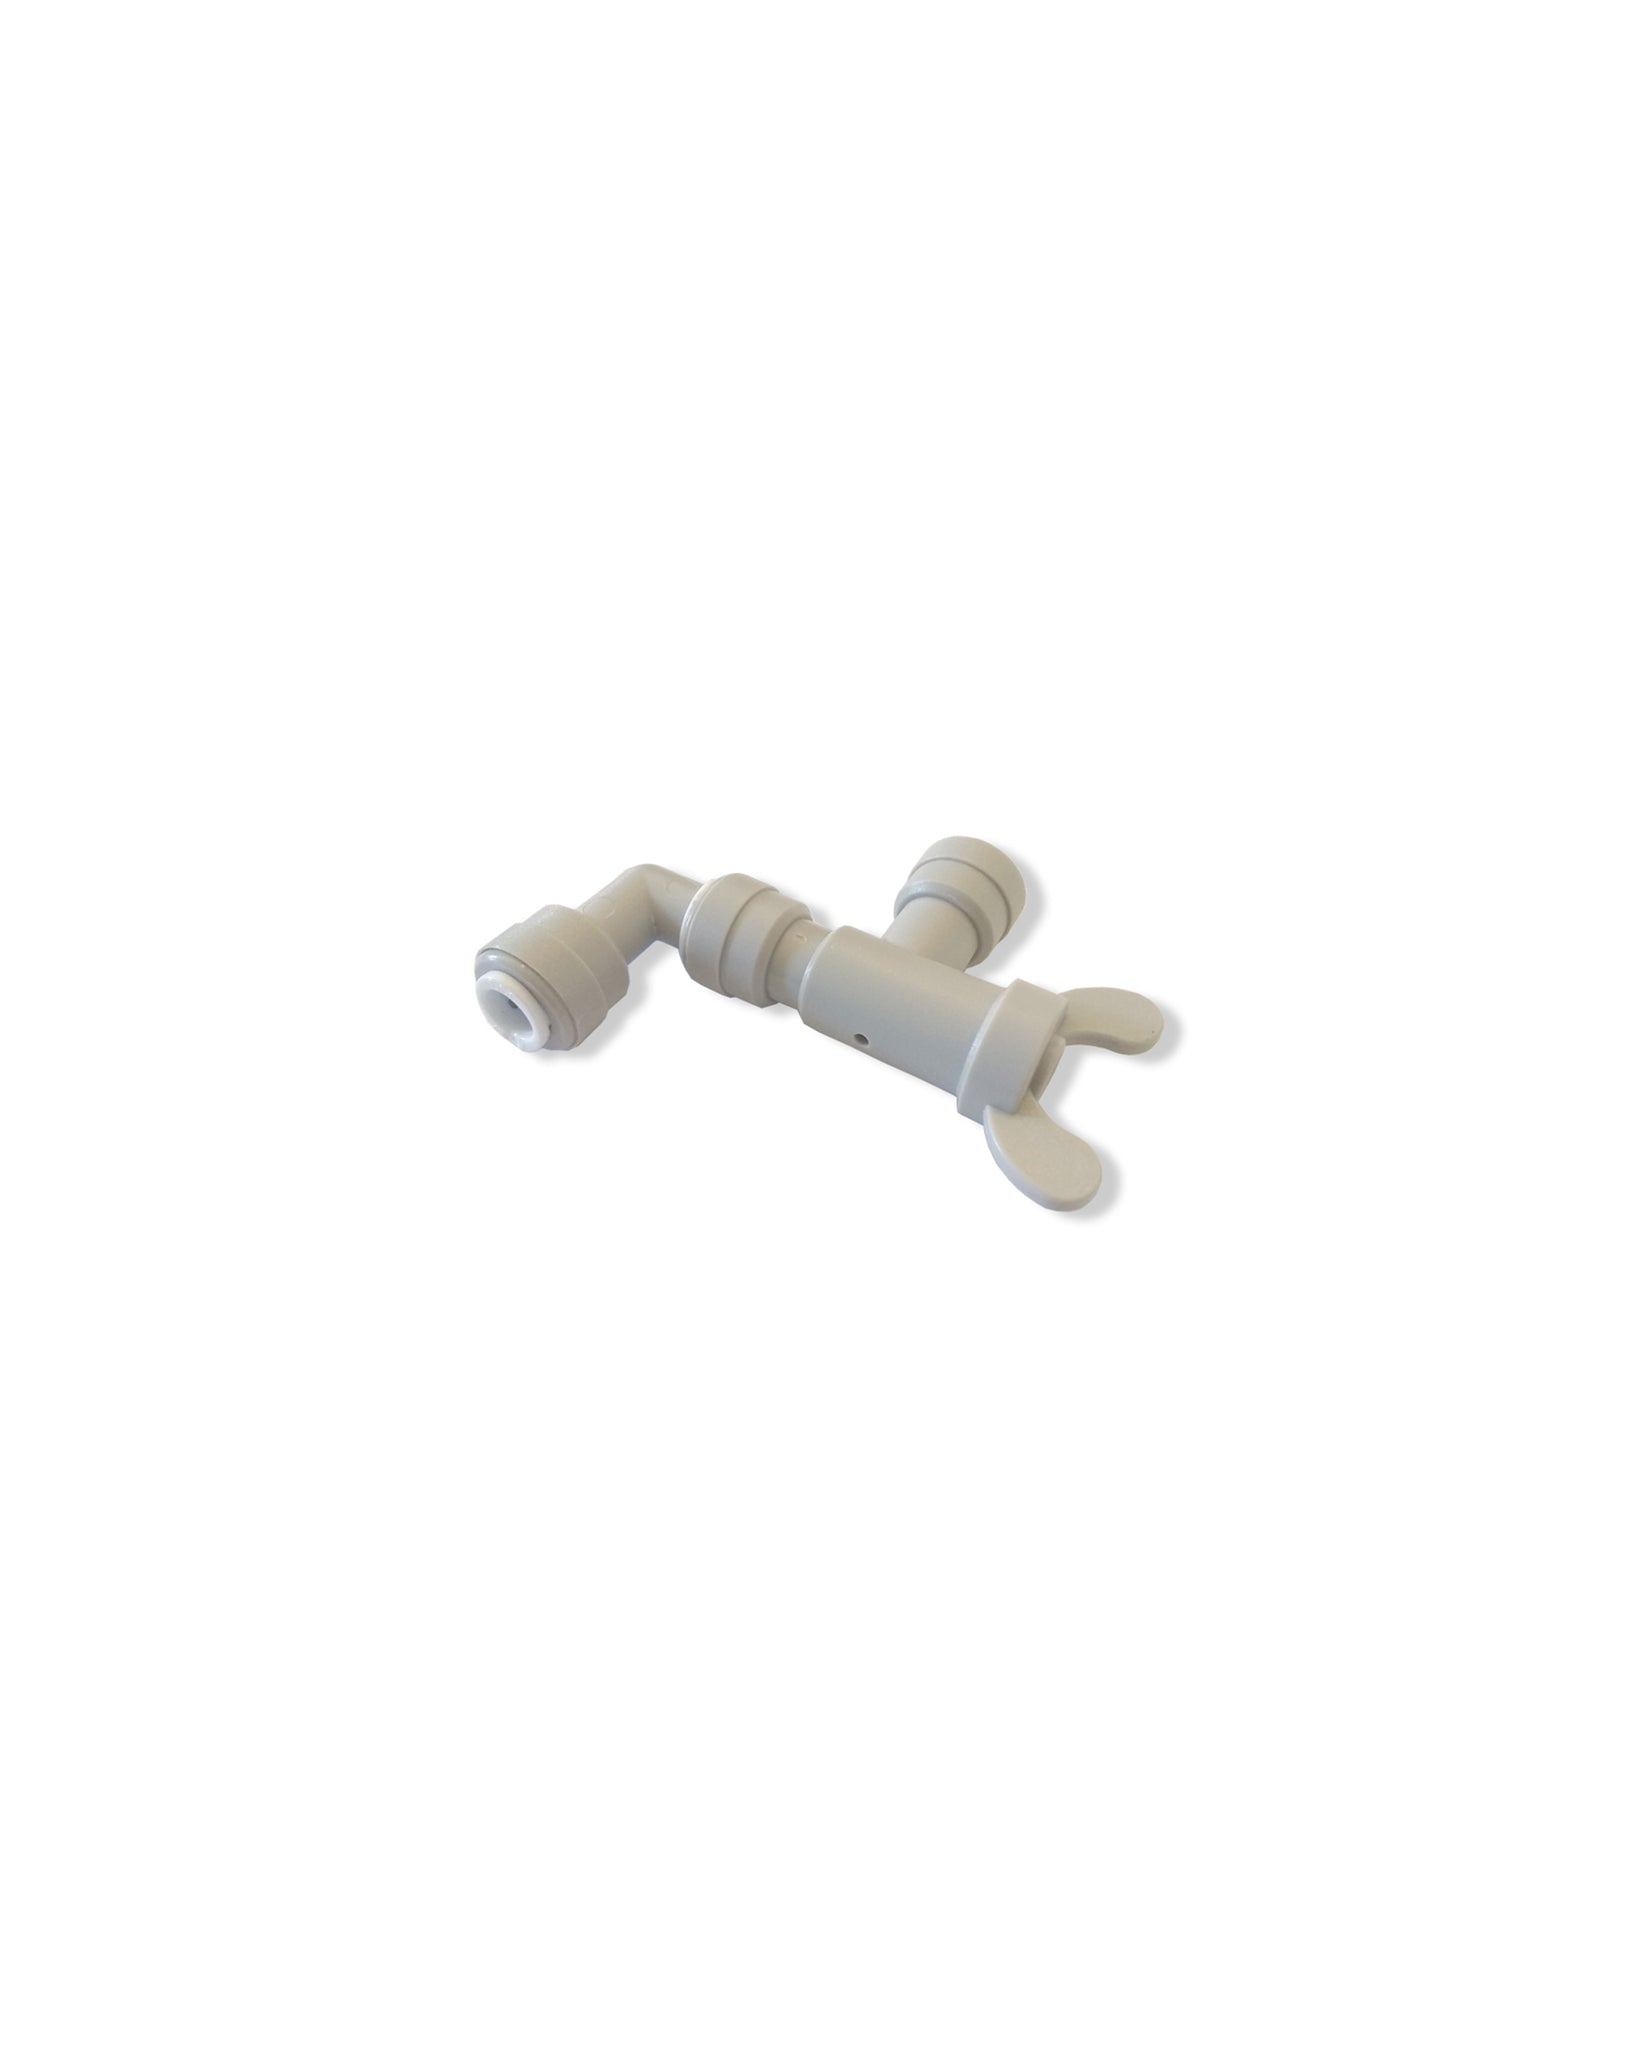 purge valve part for portable misting system and misting hydration backpack